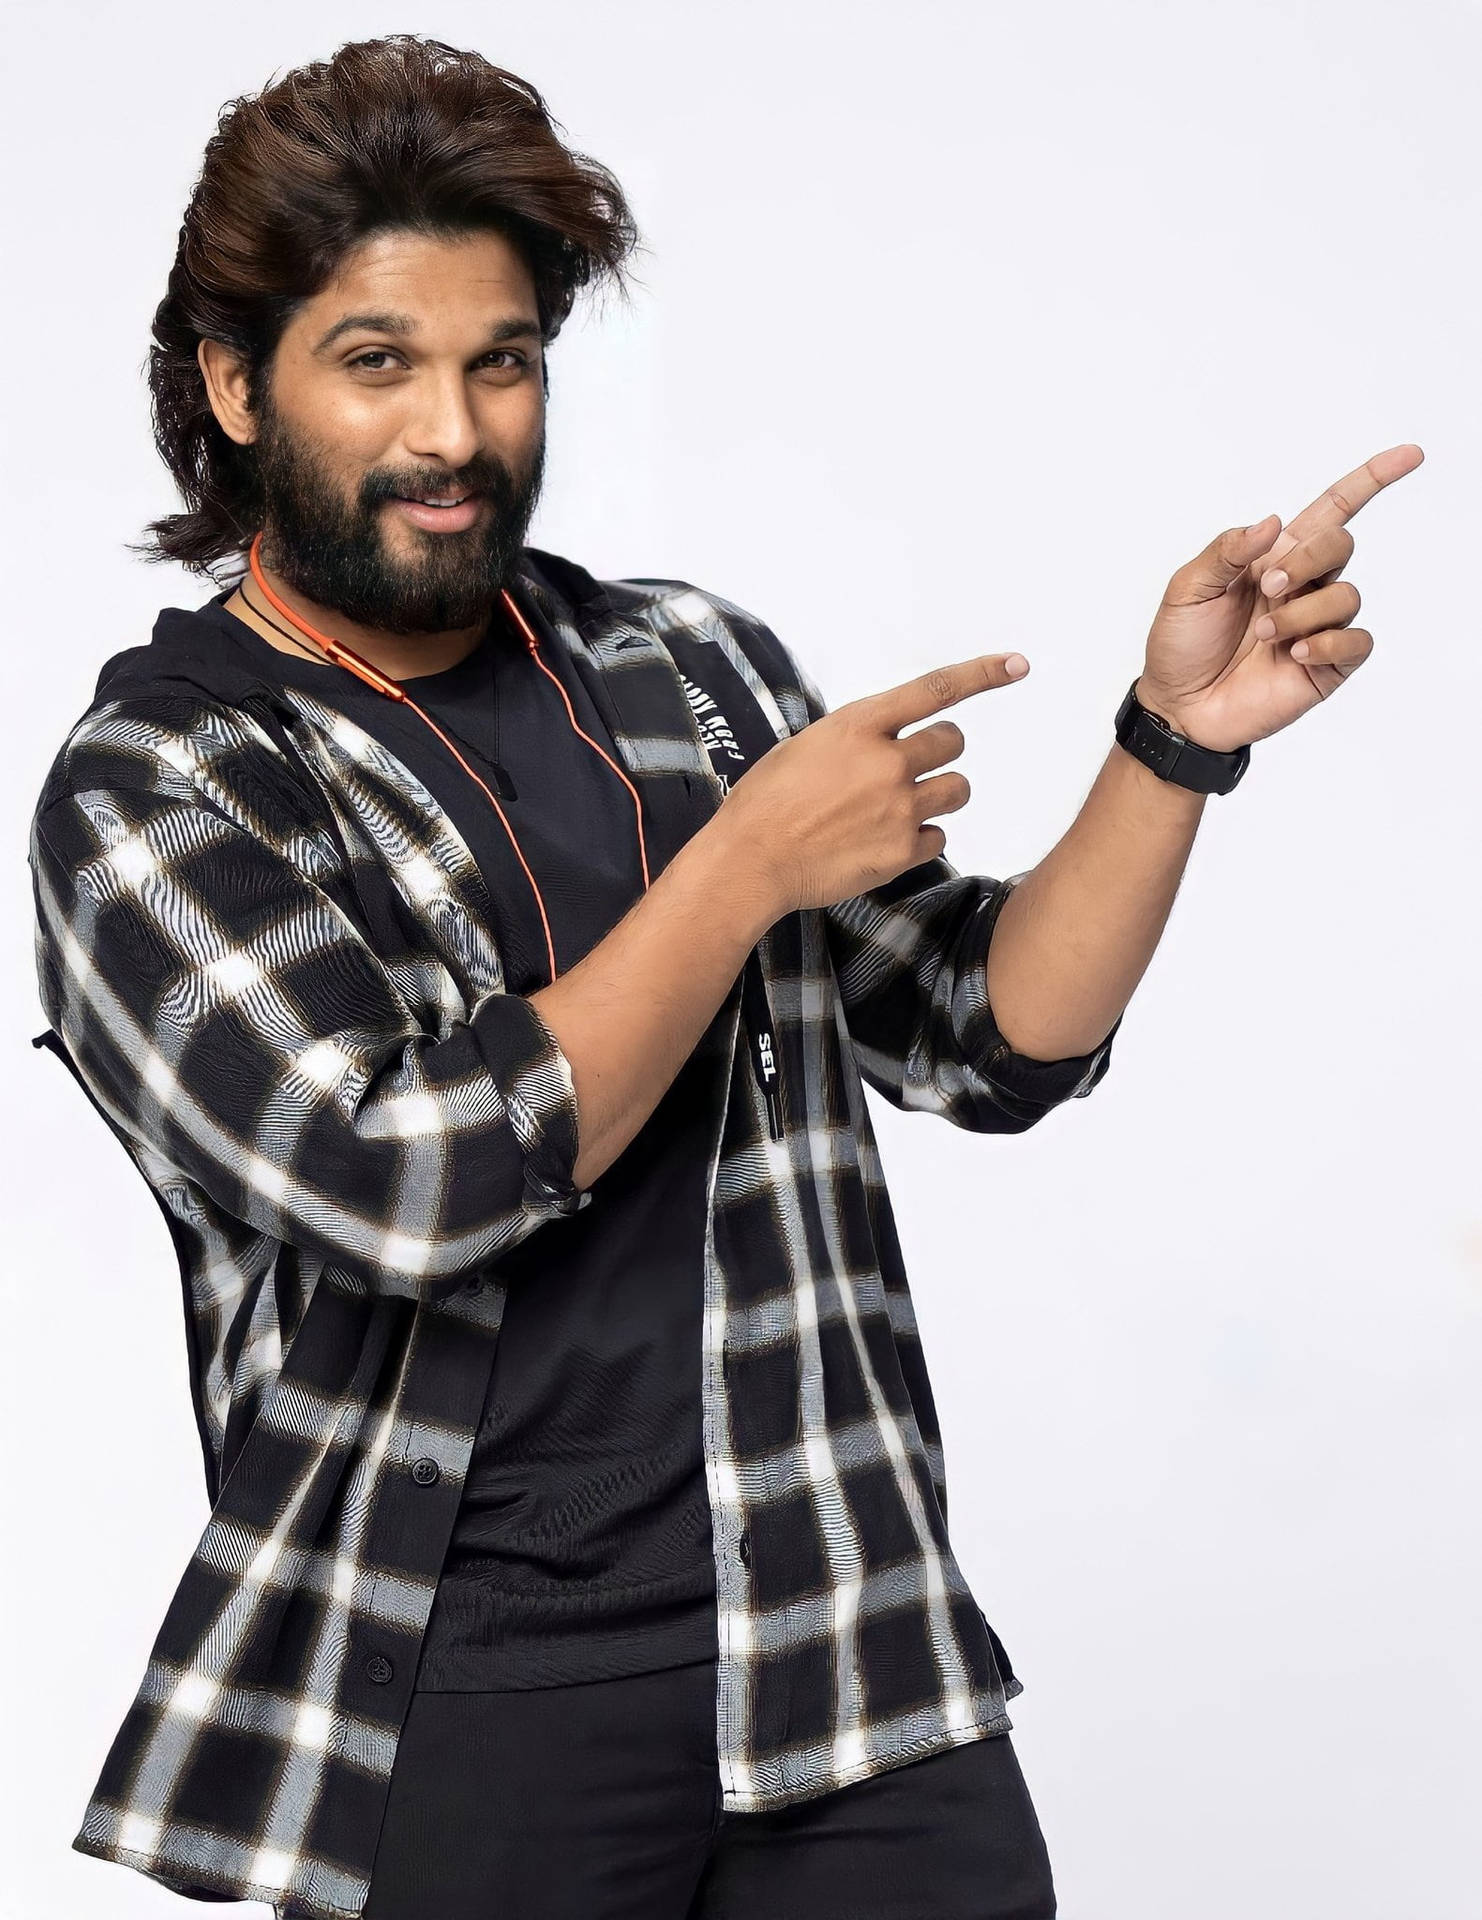 Allu Arjun Hd Pointing To The Right